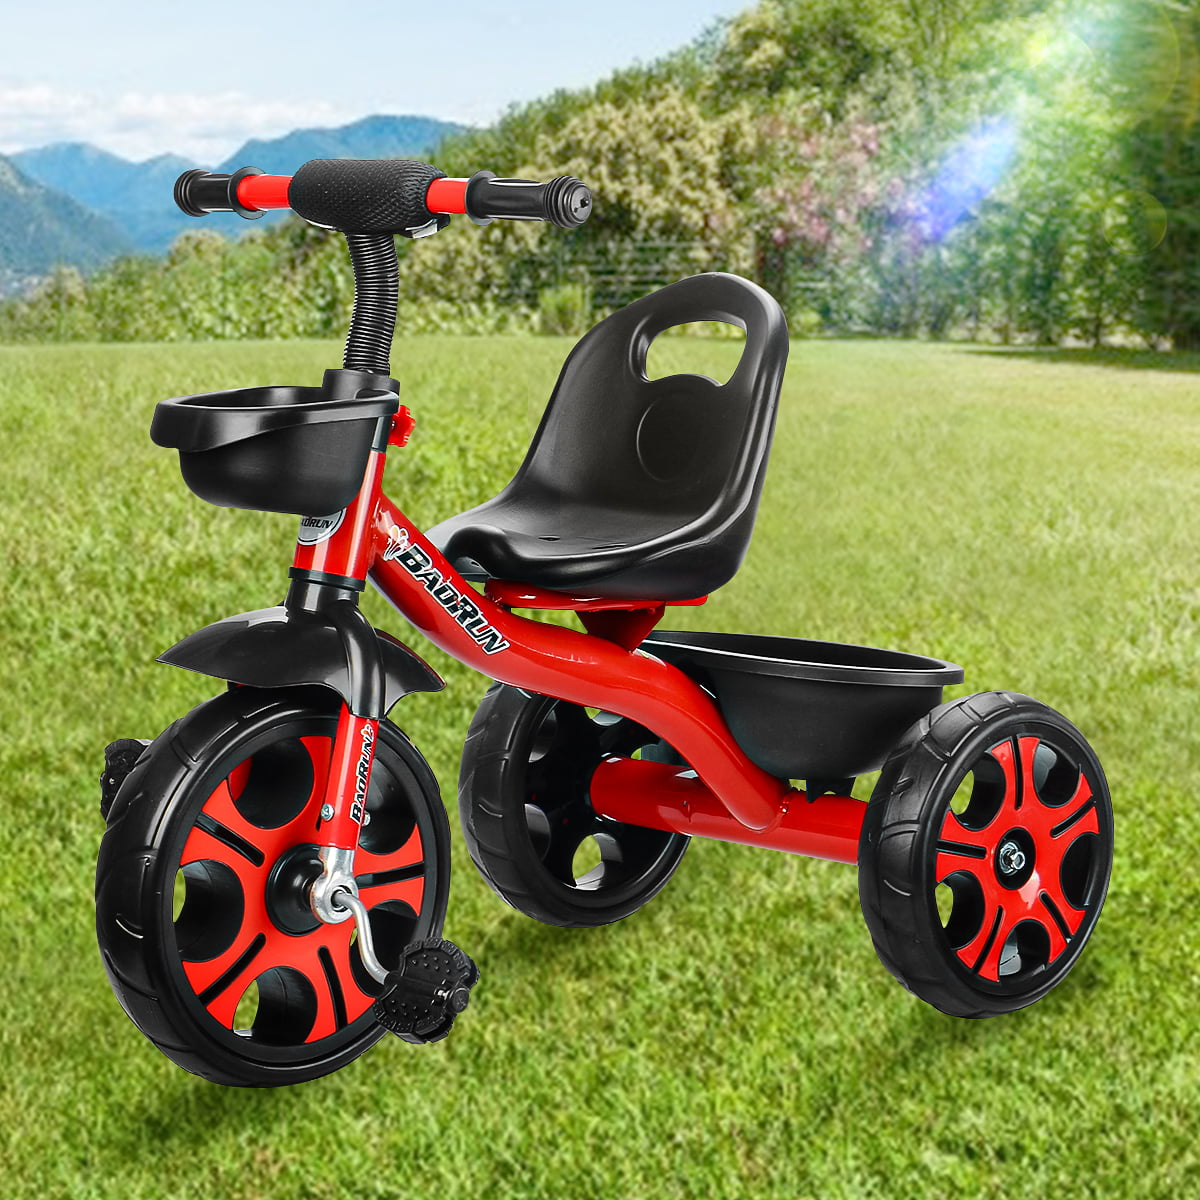 Empire Toys 69064 Junior Big Wheel 50th Anniversary Boys 18 Months to 3 Years for sale online 